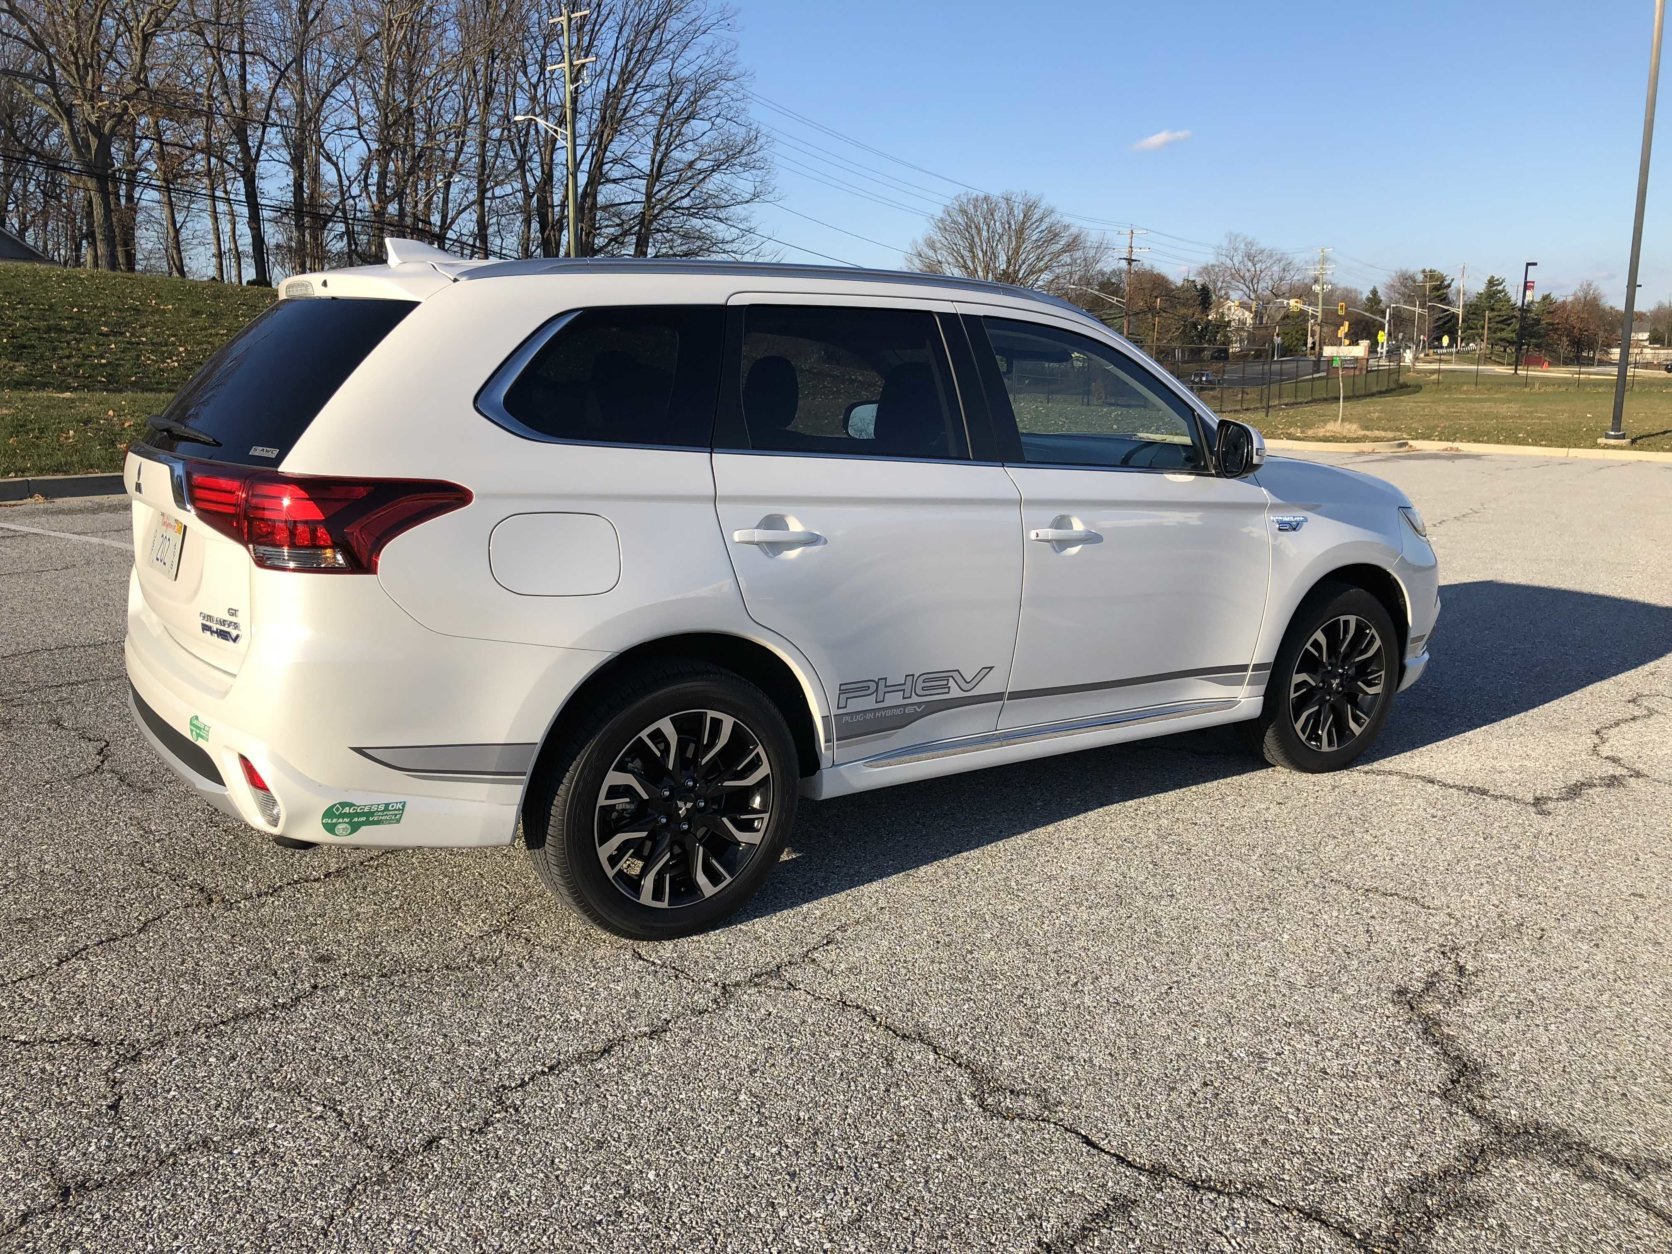 Car Review: Mitsubishi Outlander PHEV lets you plug in, use less